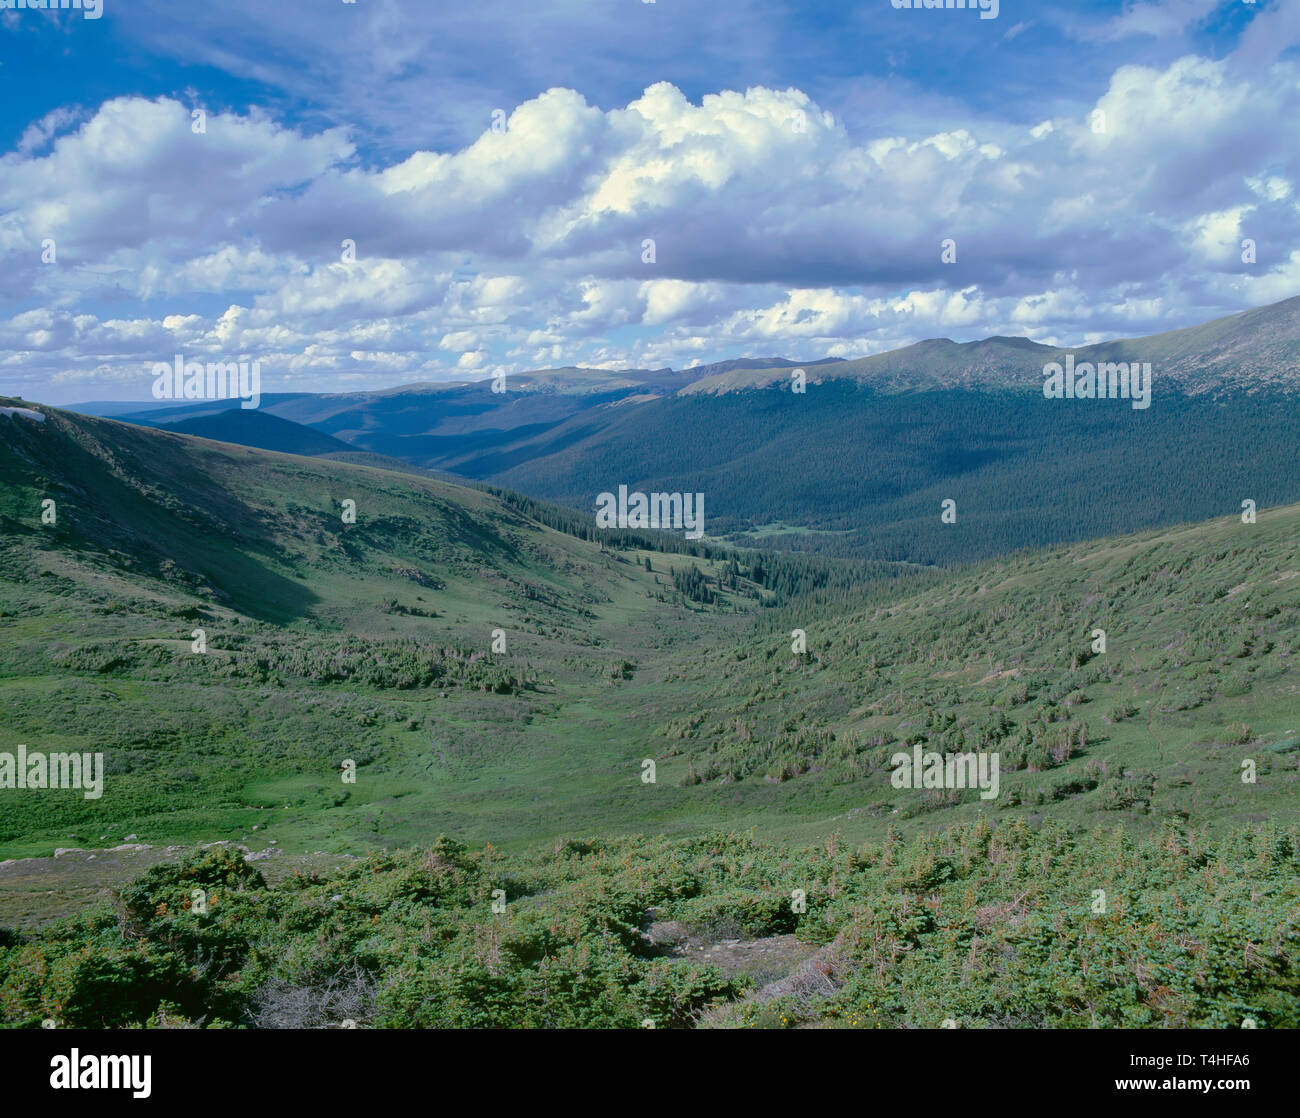 USA, Colorado, Rocky Mountain National Park, View northwest from Trail Ridge Road towards the headwaters of the Colorado River and distant Never Summe Stock Photo